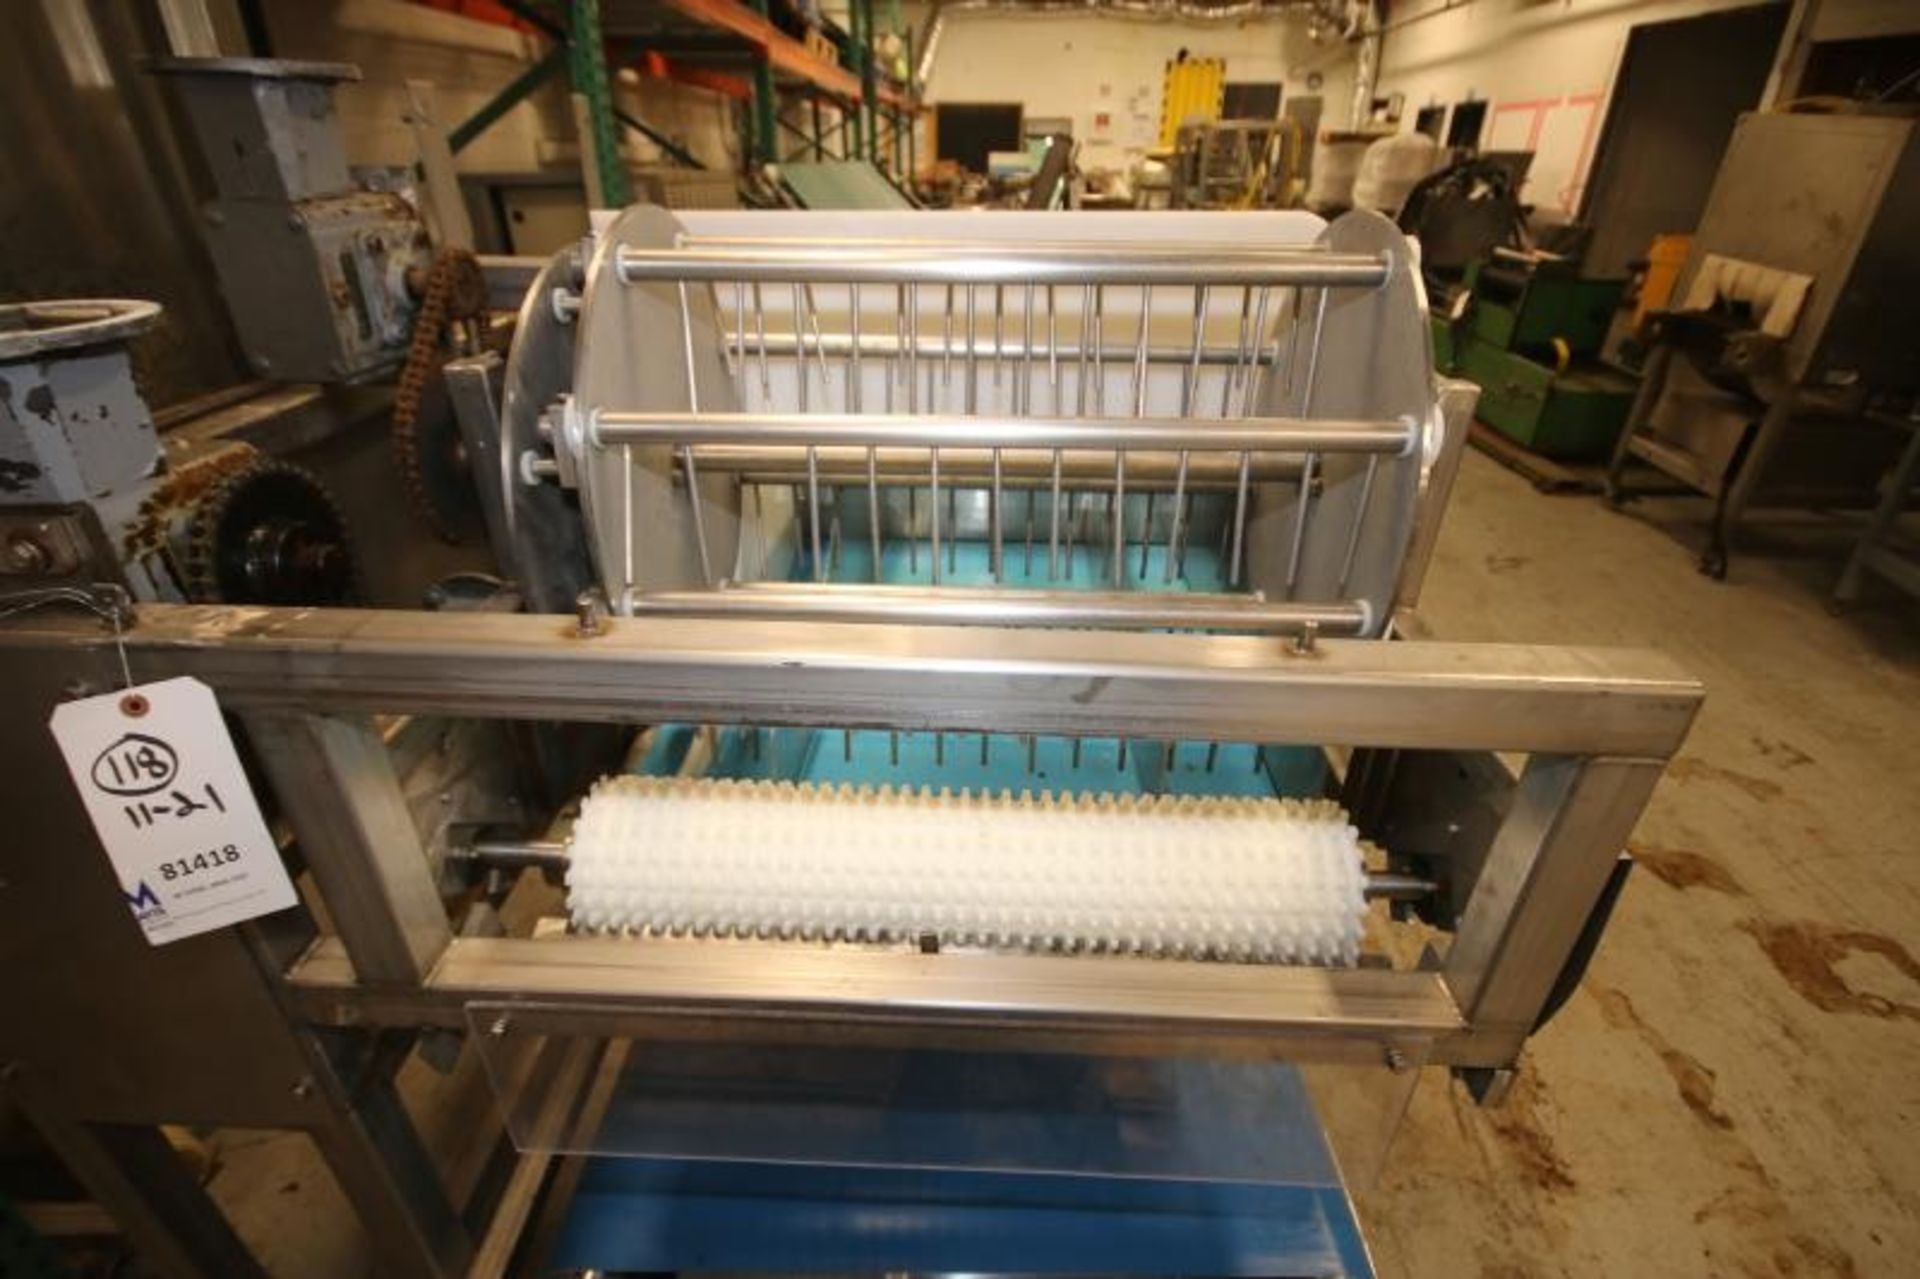 25" W S/S Waterfall Topping Applicator Mounted on Aprox. 44" L Conveyor with 29" W Belt with Side - Image 4 of 8